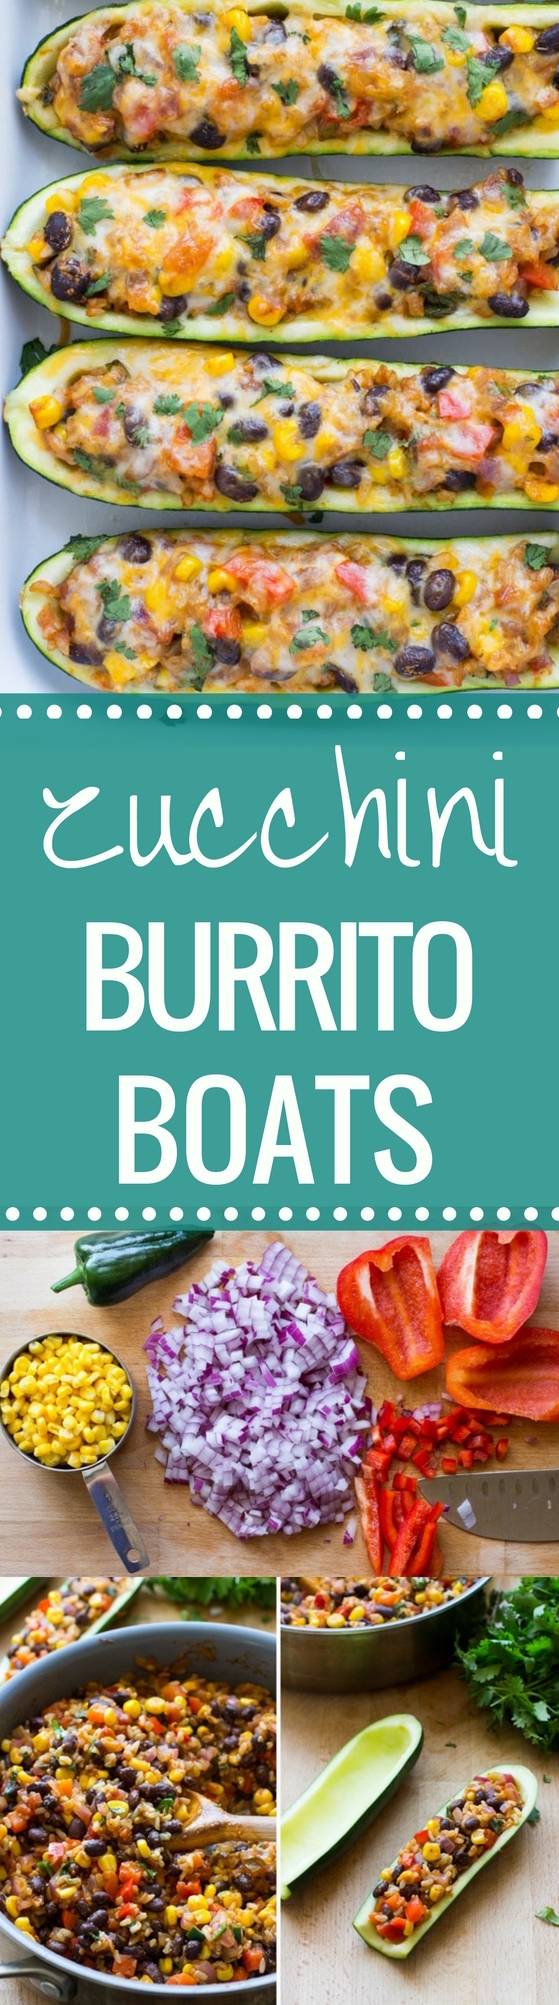 Mexican Zucchini Burrito Boats- a simple meatless meal packed with Mexican flavor! (vegetarian + gluten-free)